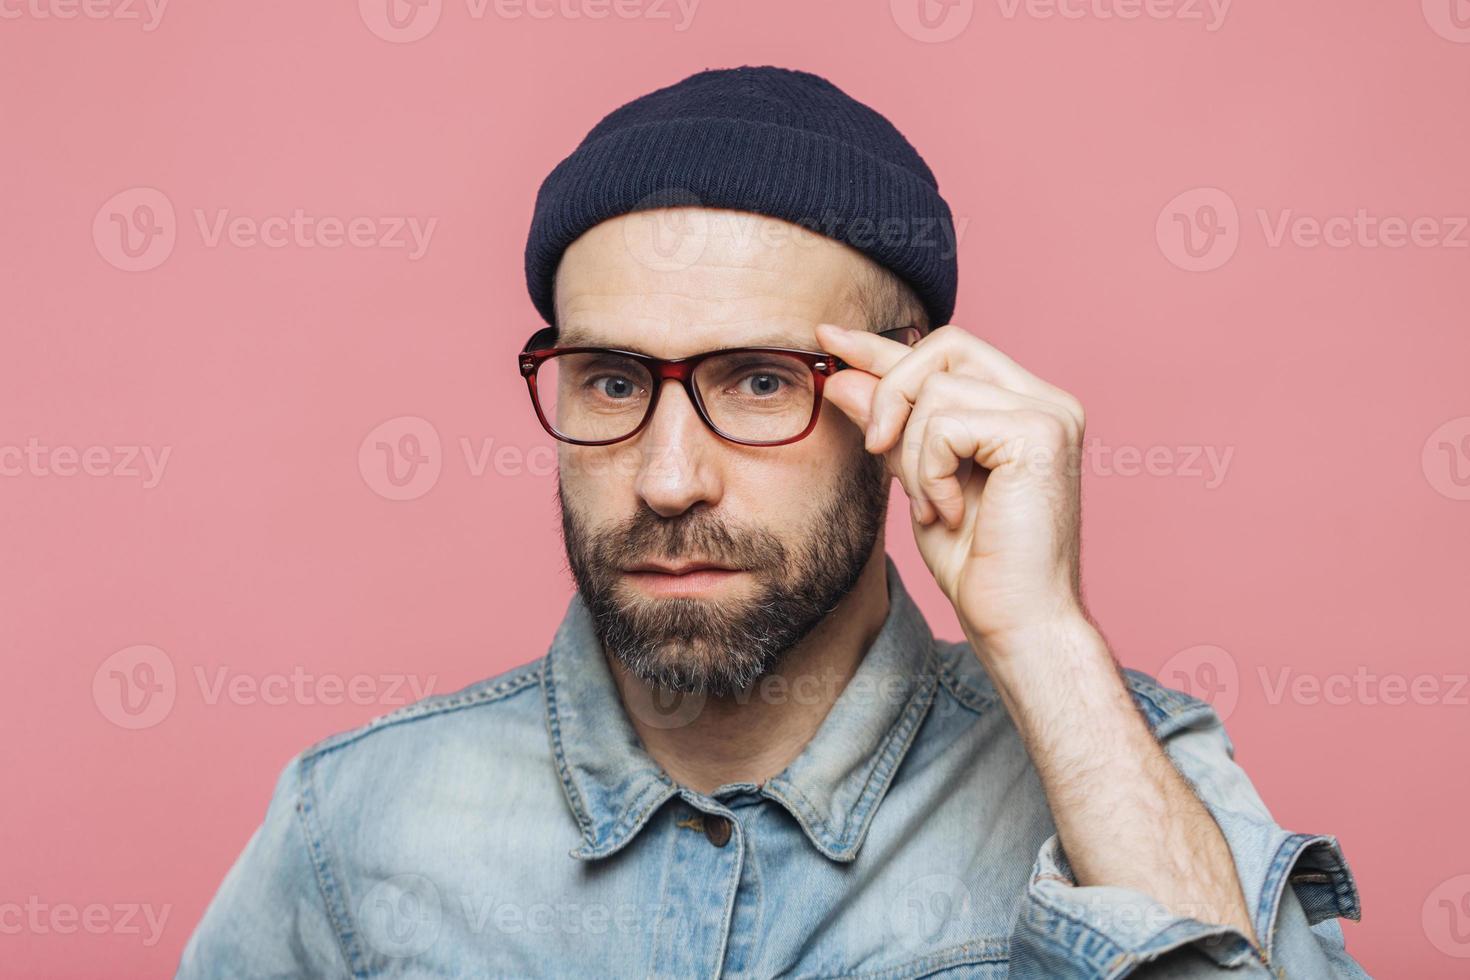 Handsome bearded man with serious expression wears spectacles and glasses, dressed in denim fashionable shirt, isolated over pink background. People, facial expressions and emotions concept. photo